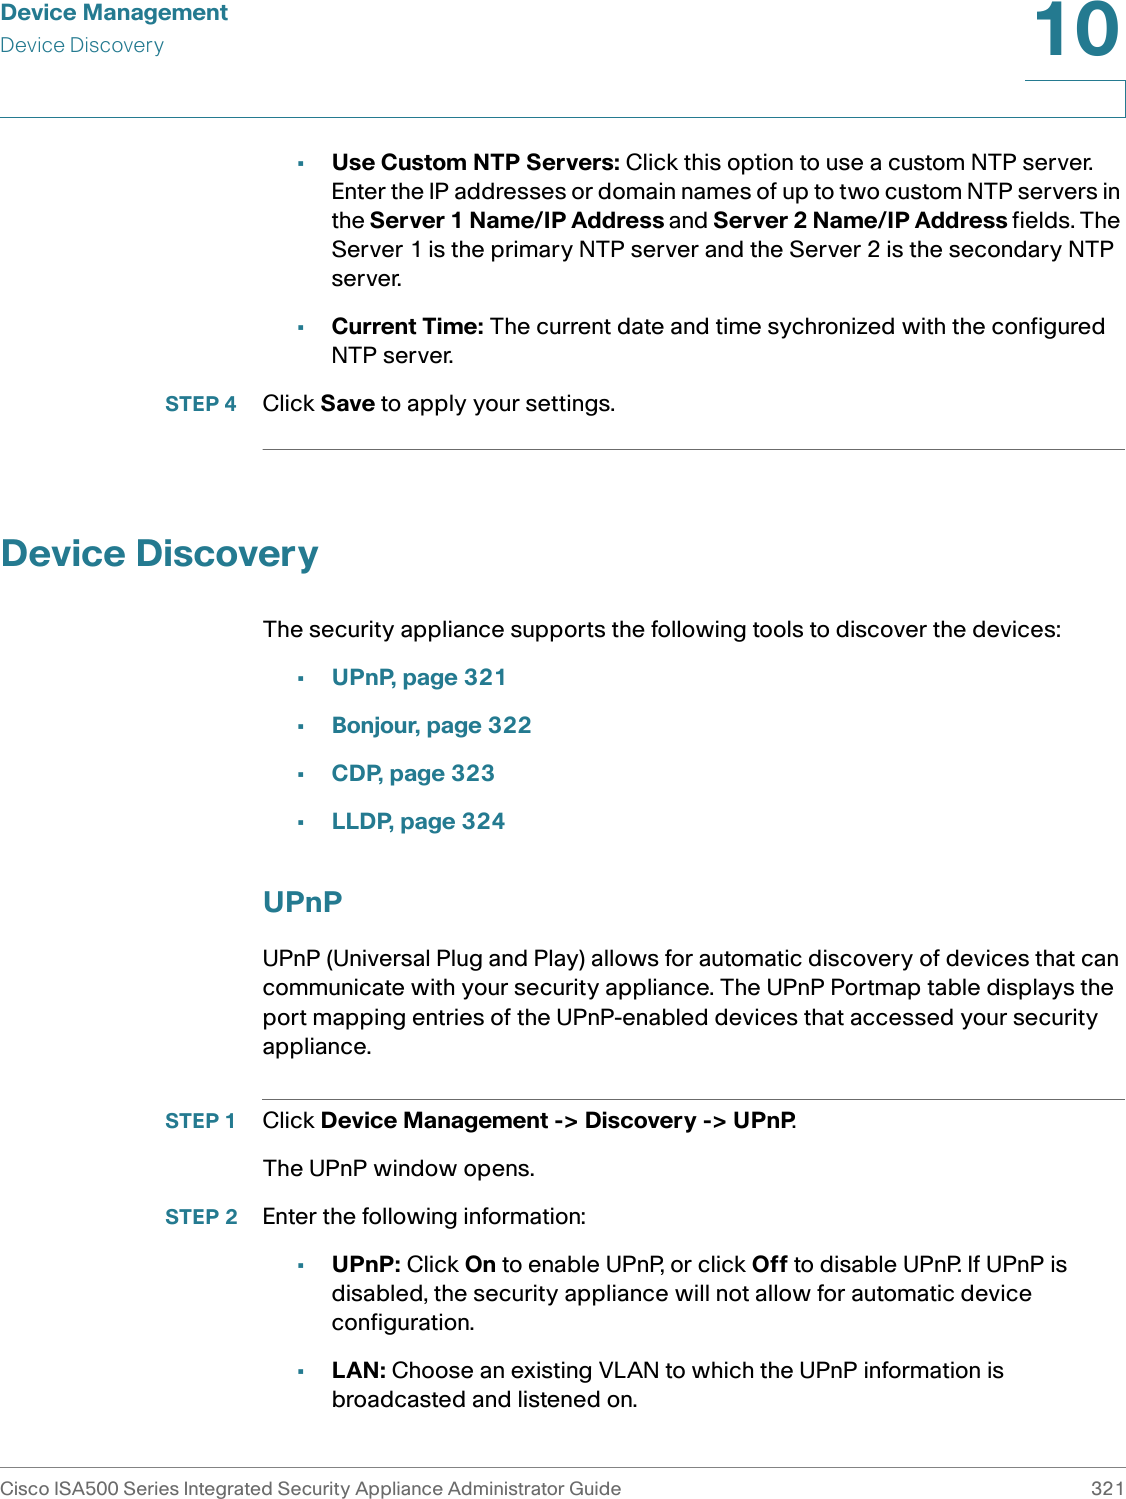 Device ManagementDevice DiscoveryCisco ISA500 Series Integrated Security Appliance Administrator Guide 32110 •Use Custom NTP Servers: Click this option to use a custom NTP server. Enter the IP addresses or domain names of up to two custom NTP servers in the Server 1 Name/IP Address and Server 2 Name/IP Address fields. The Server 1 is the primary NTP server and the Server 2 is the secondary NTP server. •Current Time: The current date and time sychronized with the configured NTP server. STEP 4 Click Save to apply your settings. Device DiscoveryThe security appliance supports the following tools to discover the devices: •UPnP, page 321•Bonjour, page 322•CDP, page 323•LLDP, page 324UPnPUPnP (Universal Plug and Play) allows for automatic discovery of devices that can communicate with your security appliance. The UPnP Portmap table displays the port mapping entries of the UPnP-enabled devices that accessed your security appliance. STEP 1 Click Device Management -&gt; Discovery -&gt; UPnP.The UPnP window opens.STEP 2 Enter the following information:•UPnP: Click On to enable UPnP, or click Off to disable UPnP. If UPnP is disabled, the security appliance will not allow for automatic device configuration. •LAN: Choose an existing VLAN to which the UPnP information is broadcasted and listened on.